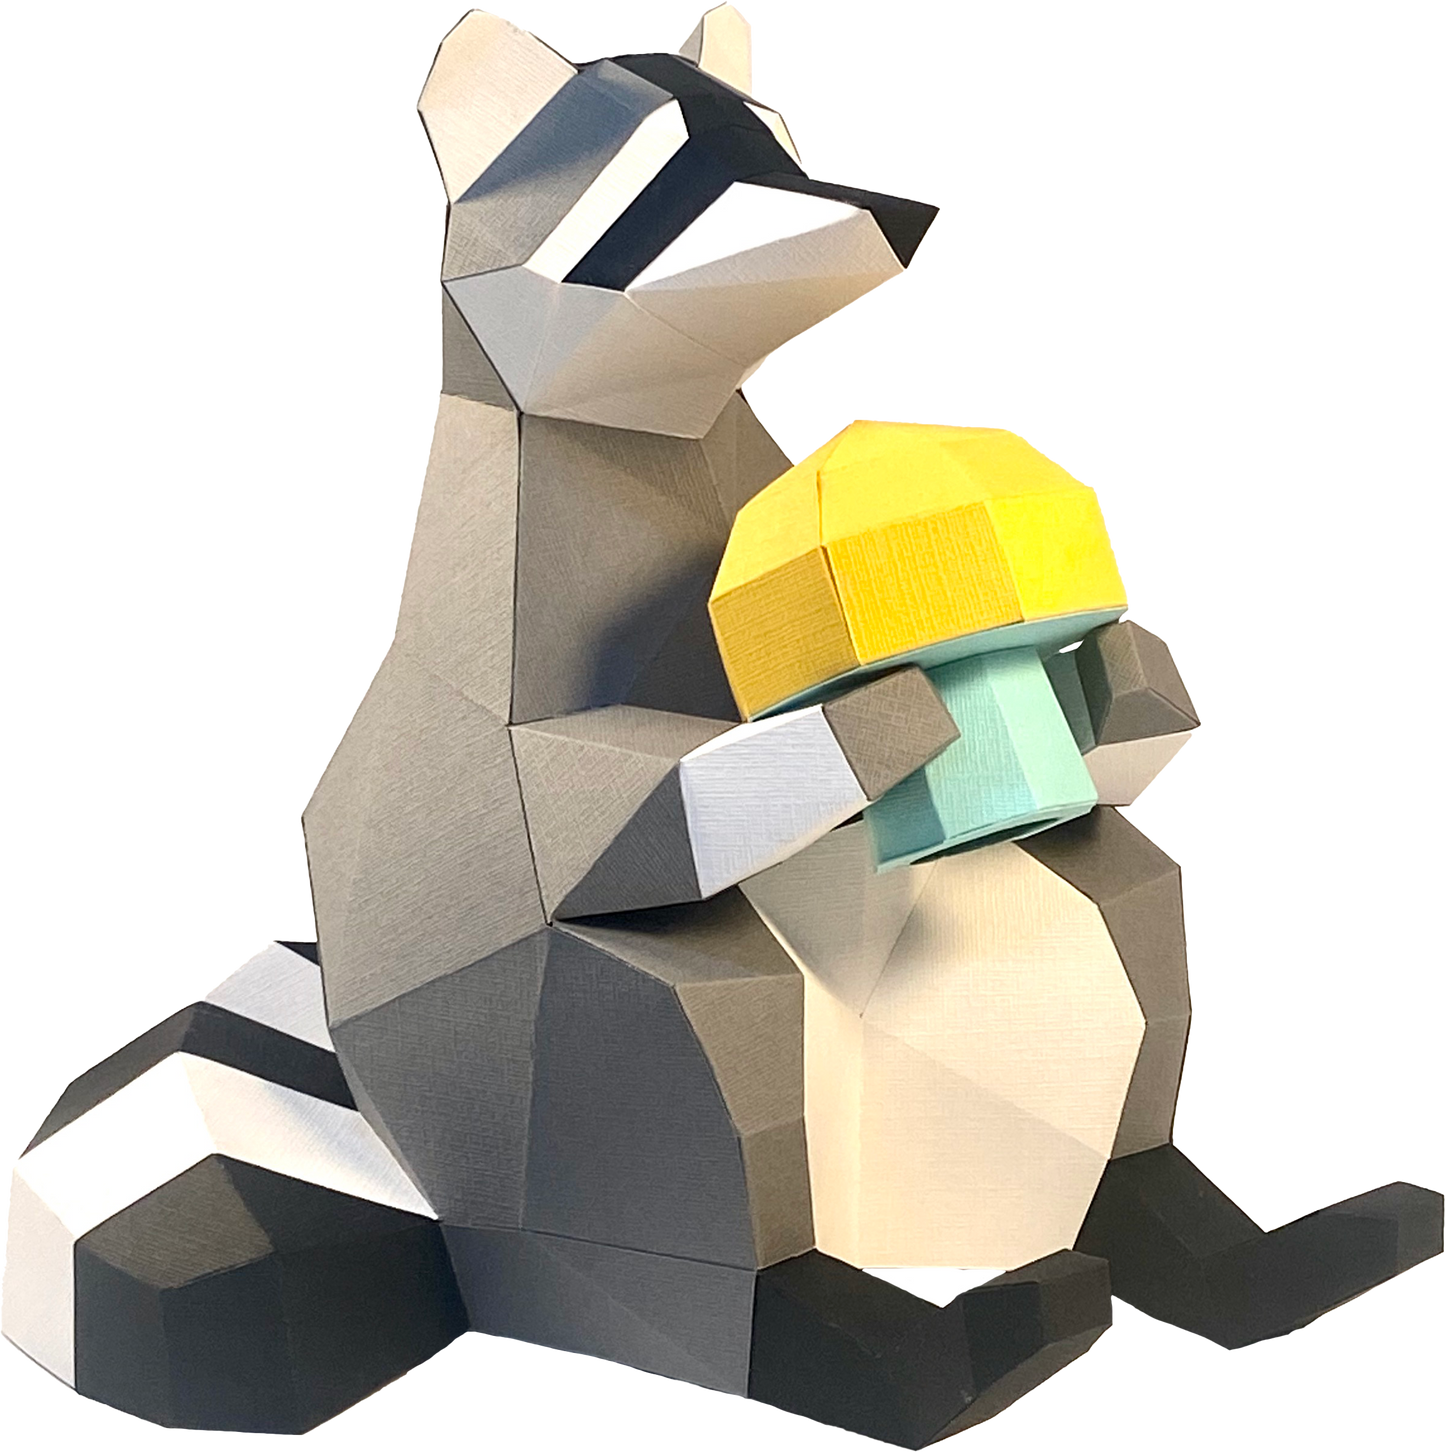 Raccoon POLY PAPER CRAFT